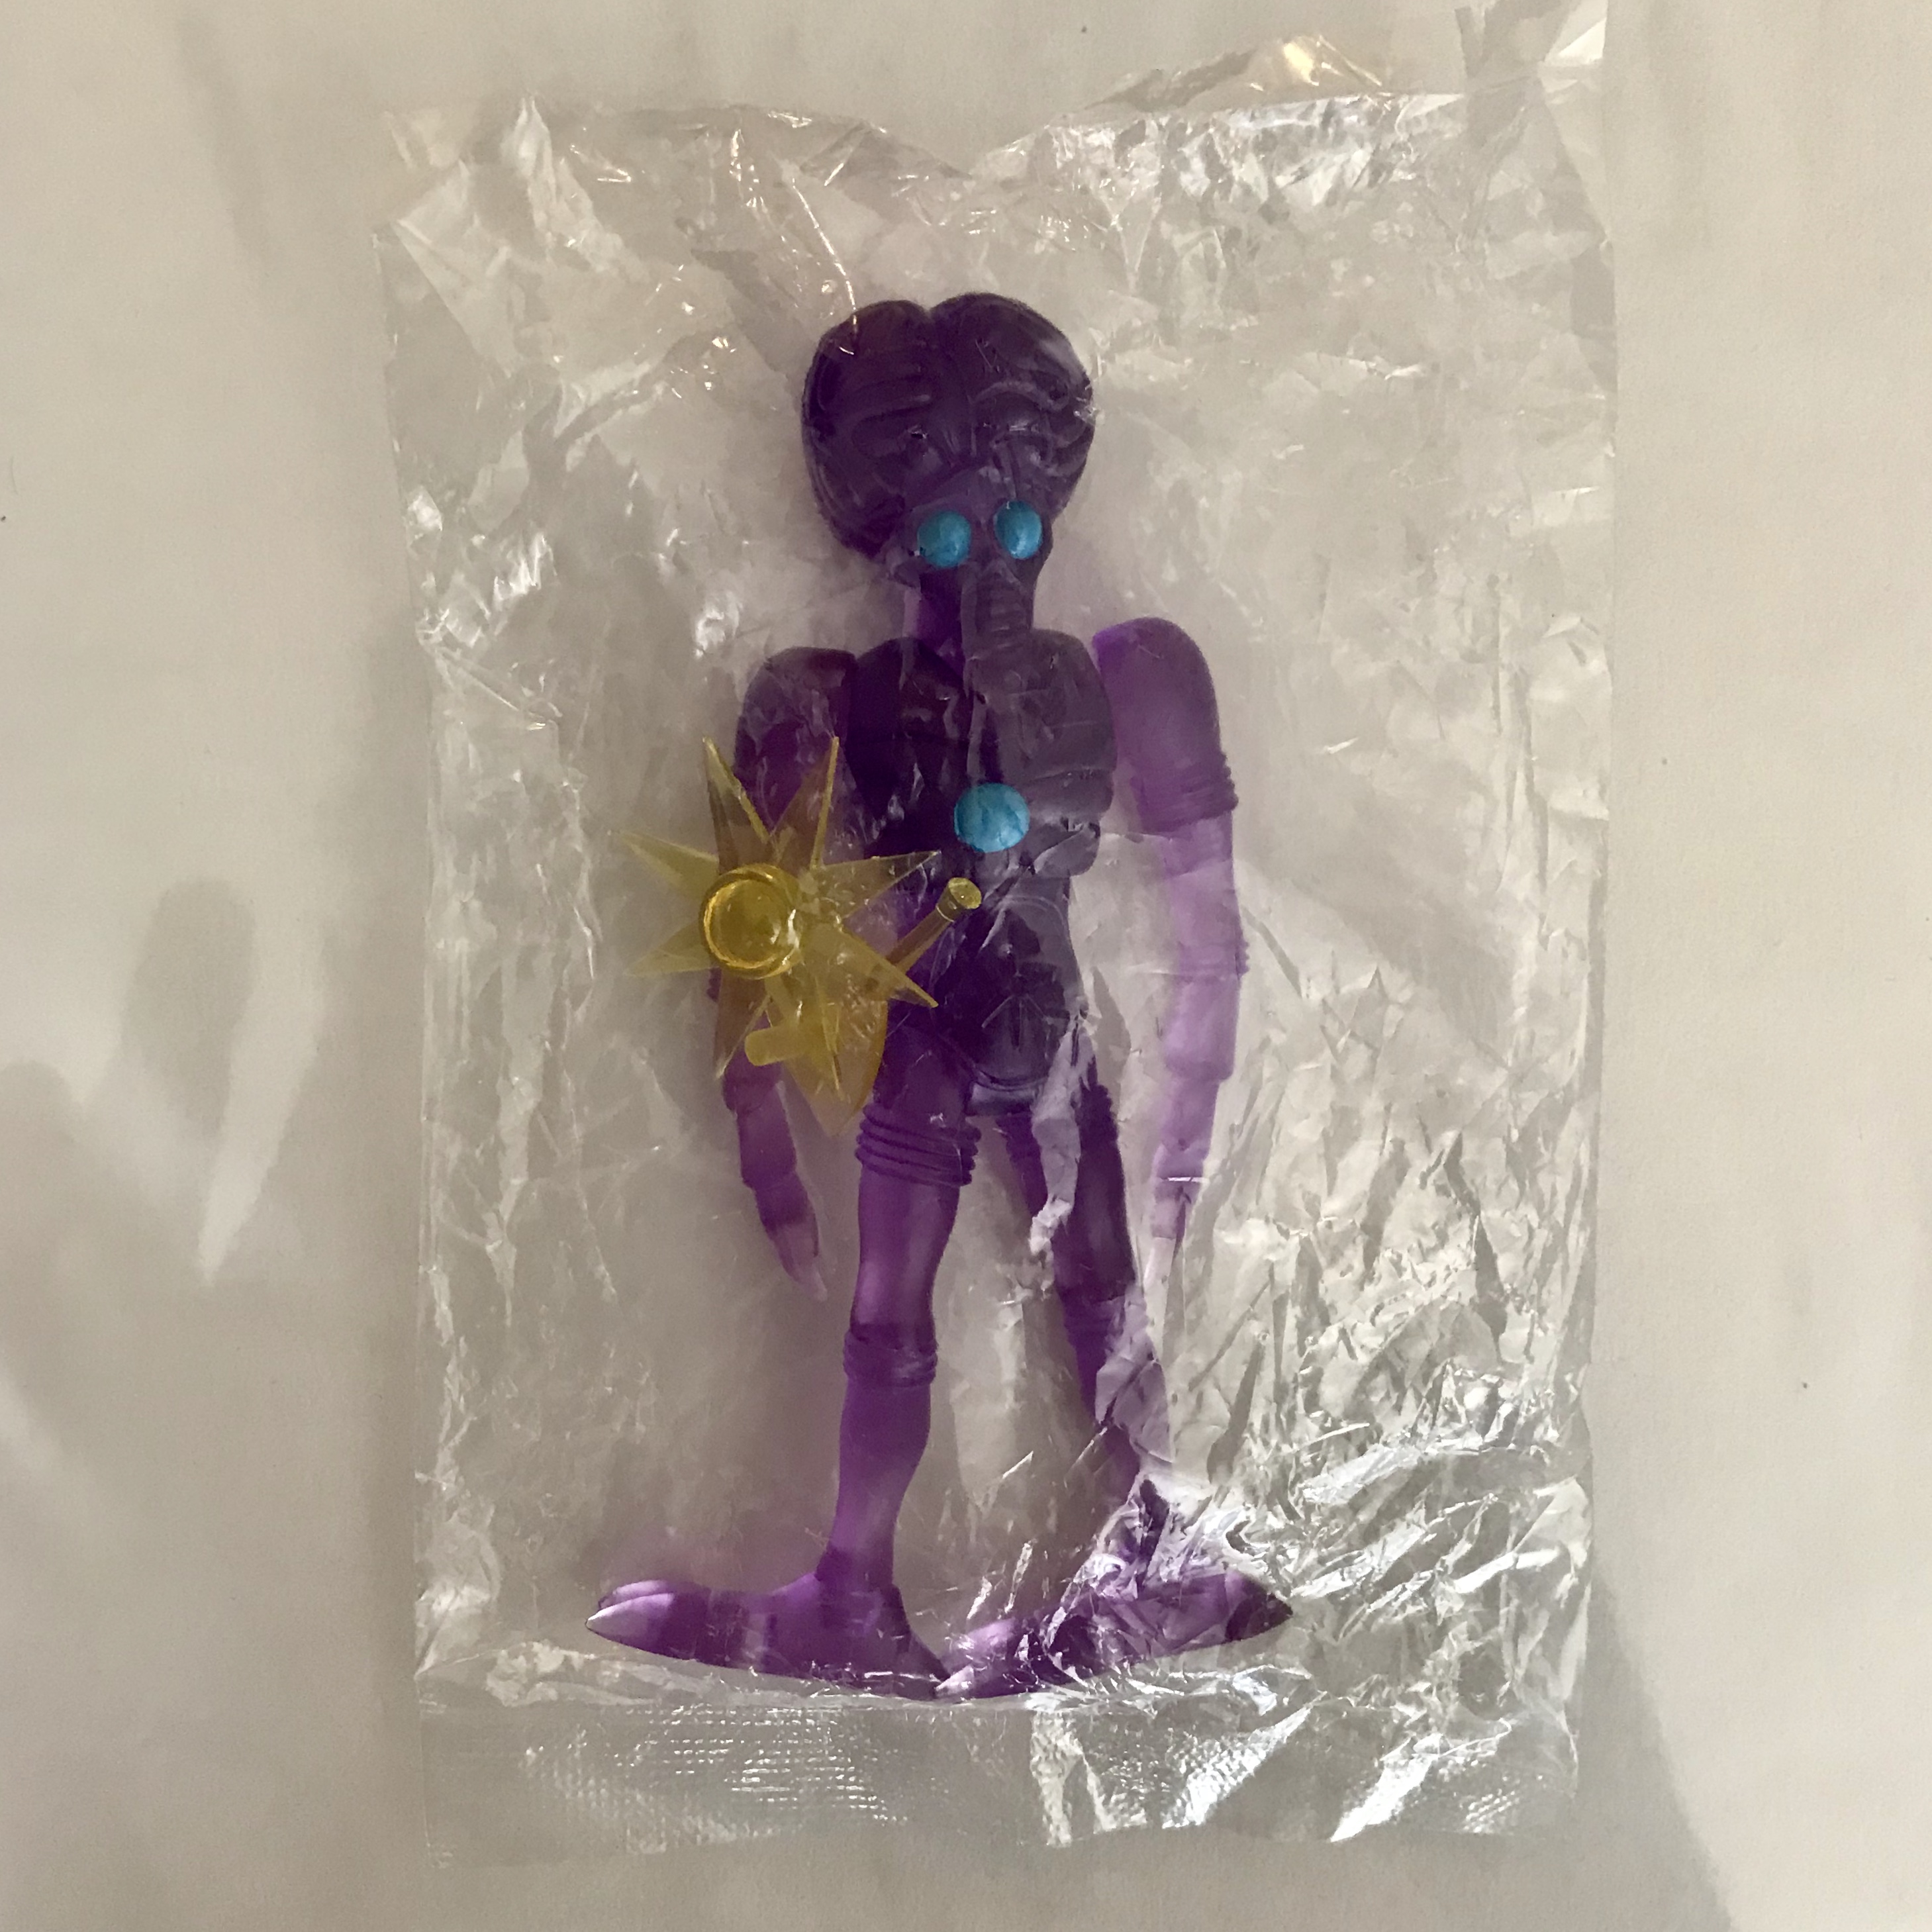 A 2012 ORBITRON EXCLUSIVE NEW YORK COMIC CON SEALED IN FACTORY BAG sitting in a plastic bag.